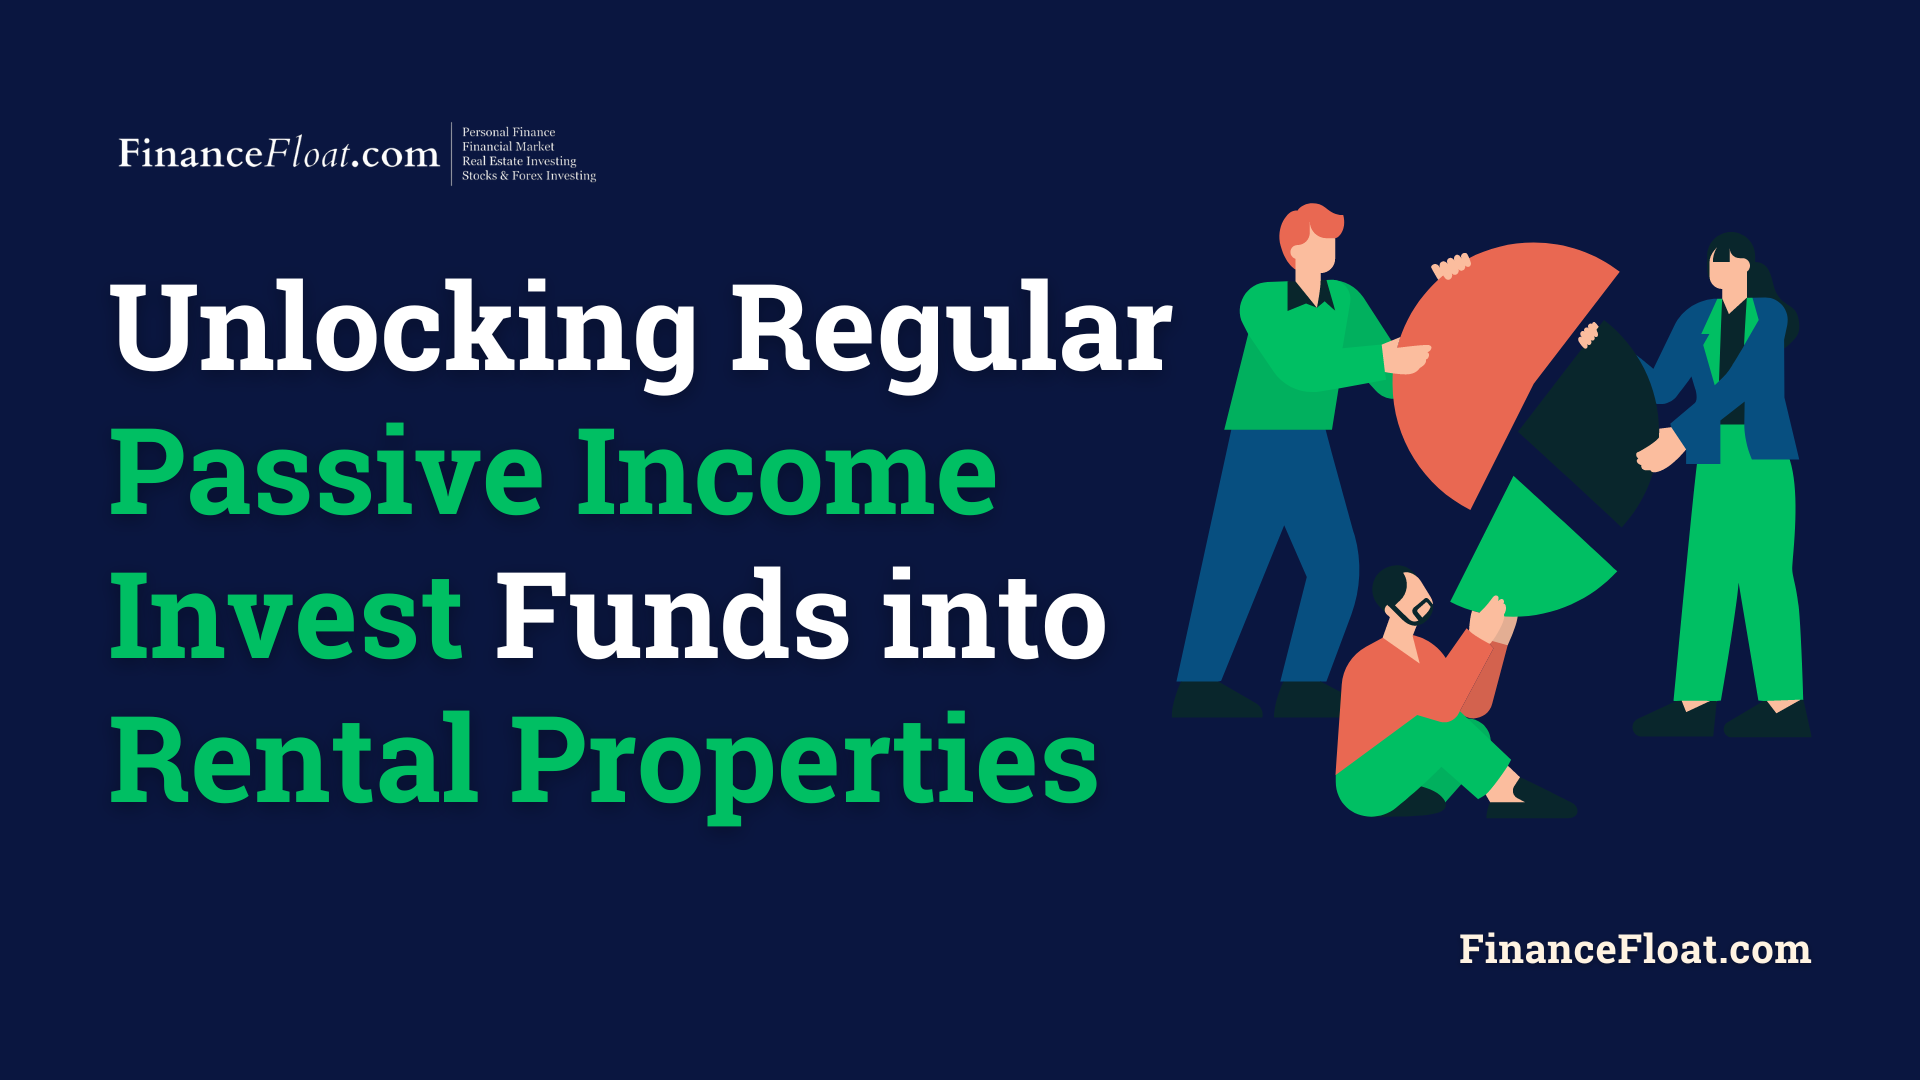 Unlocking Regular Passive Income Invest Funds into Rental Properties